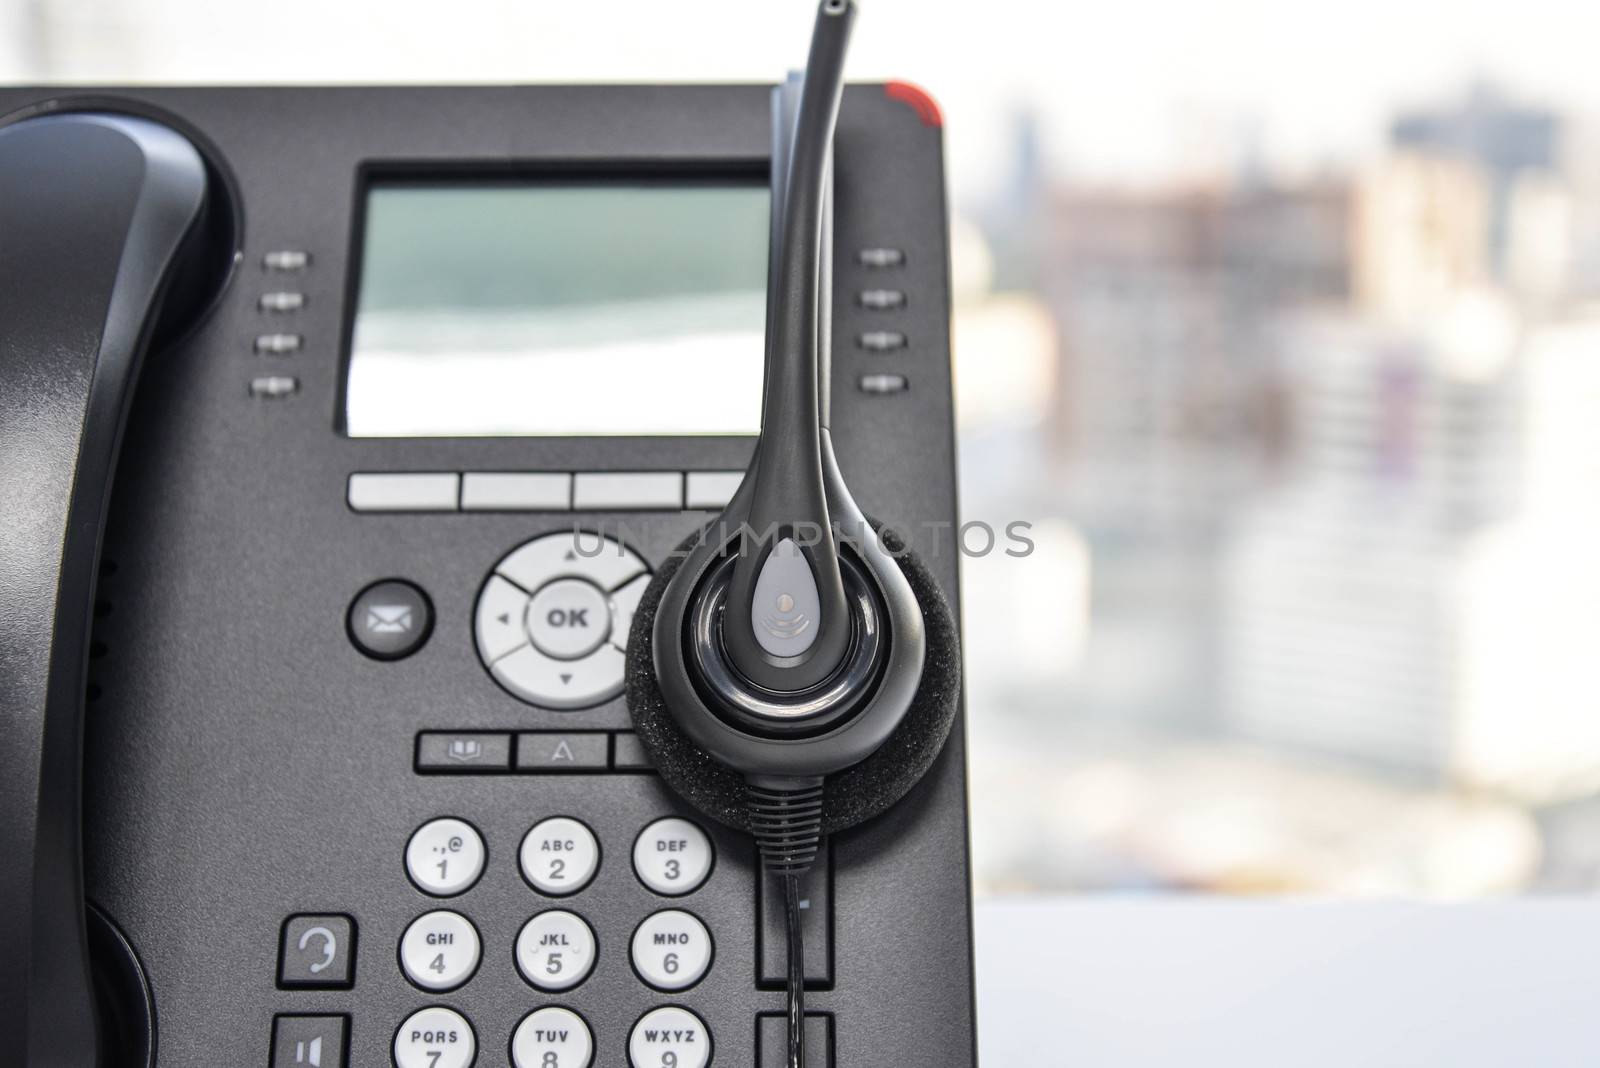 Headset and the IP Phone by Magneticmcc